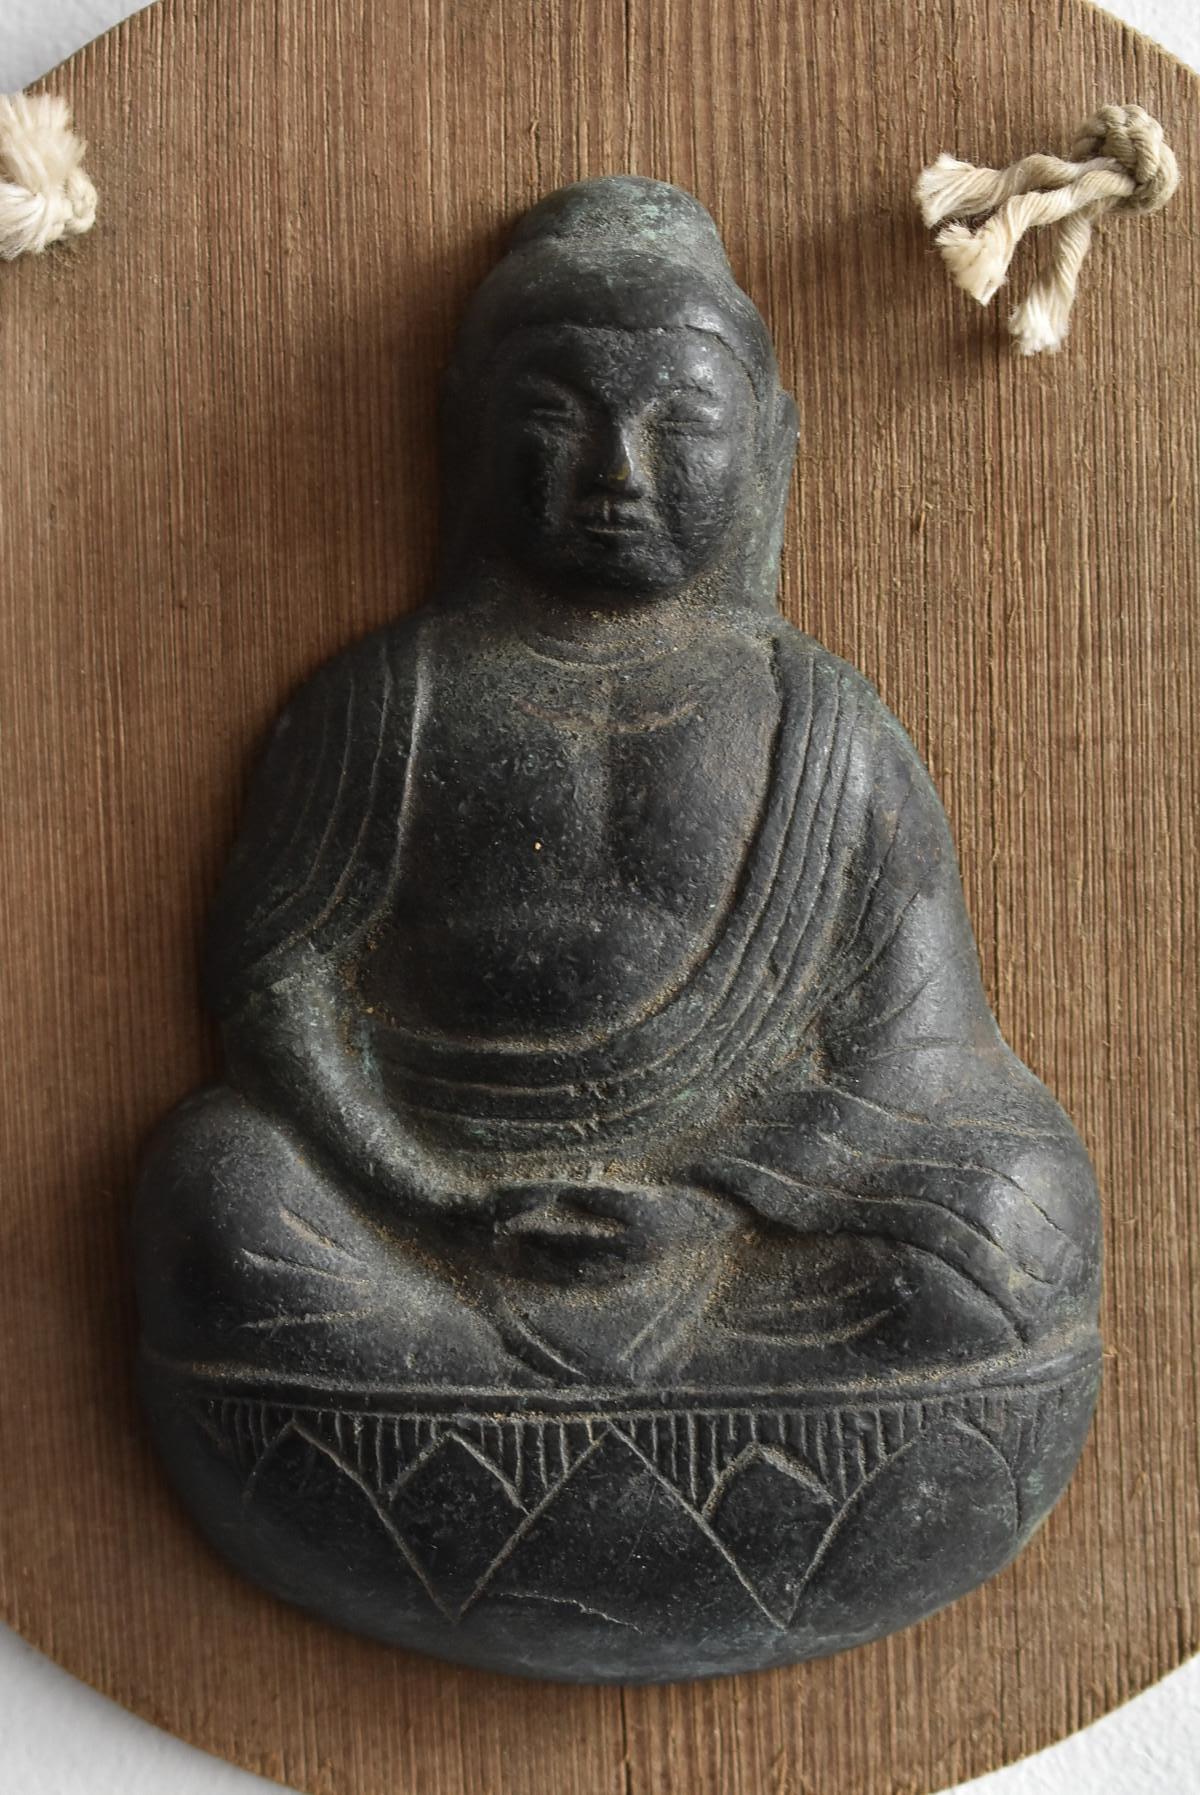 This is what is called a hanging Buddha. (Called kakebutu in Japan)
kakebutu is a combination of a circular plate and a Buddha statue, which was hung in a shrine or temple.
It can be said to be one of the genres of Japanese cultural